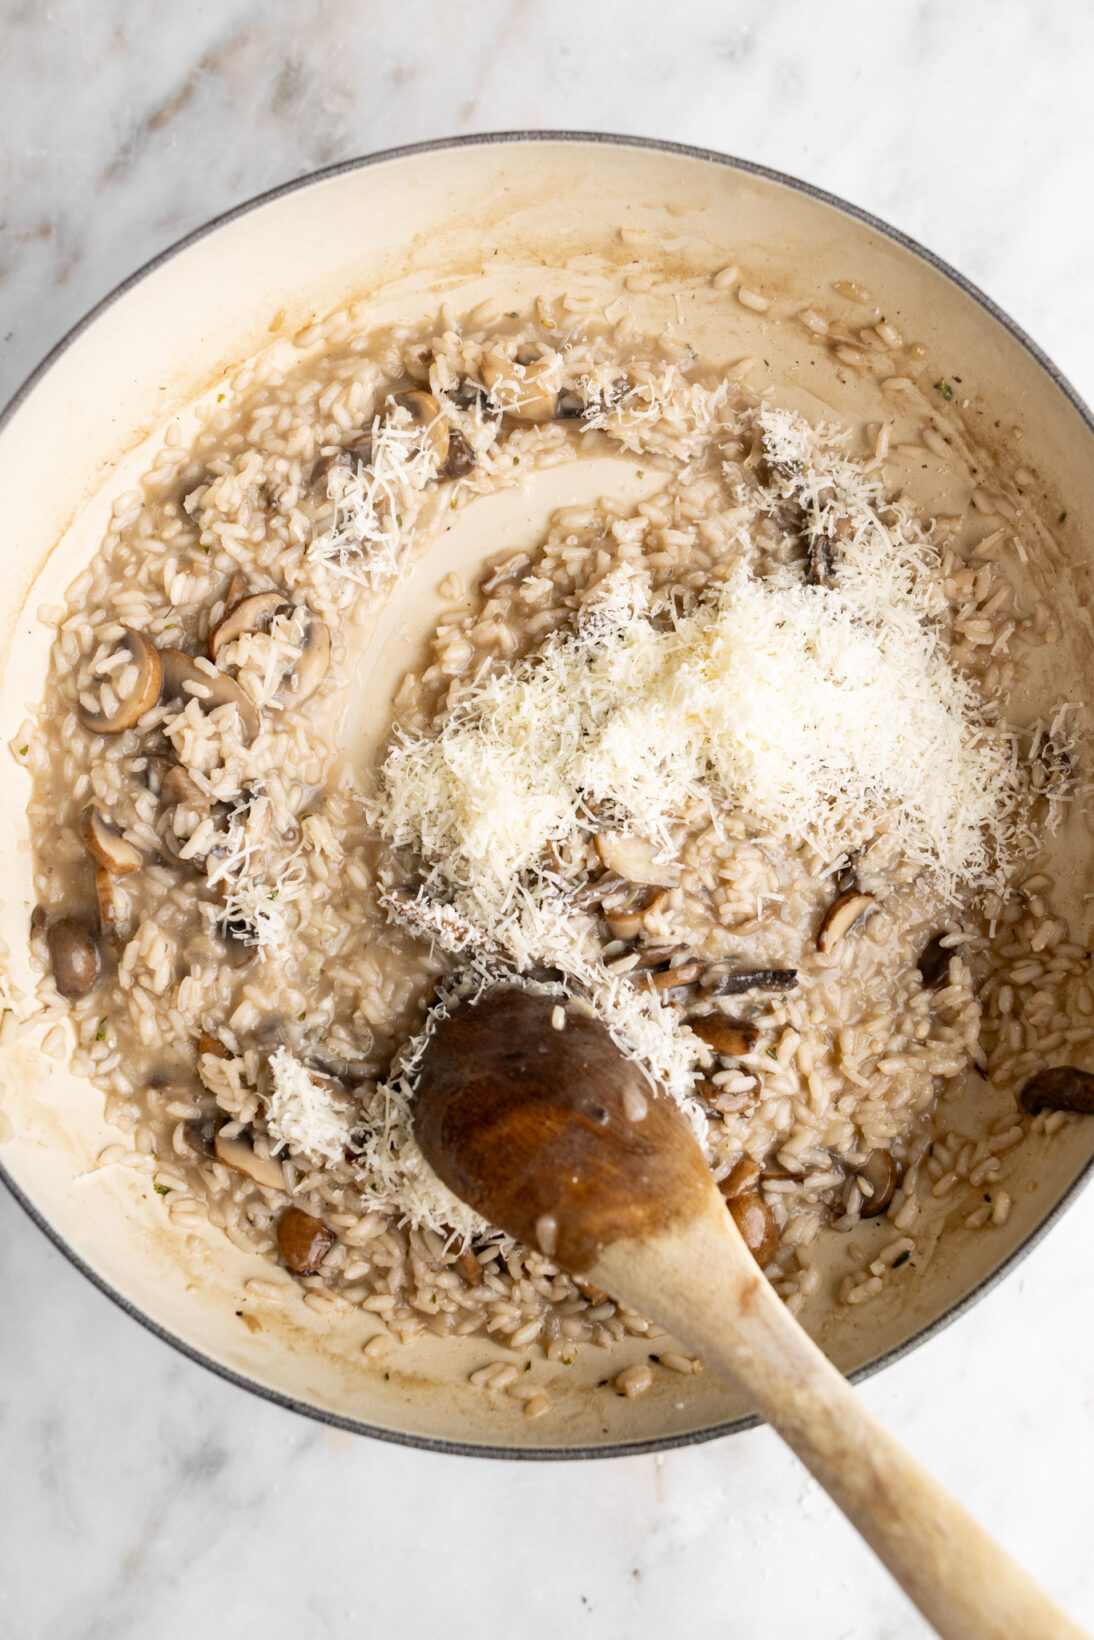 Making mushroom risotto: mixing in the parmesan cheese